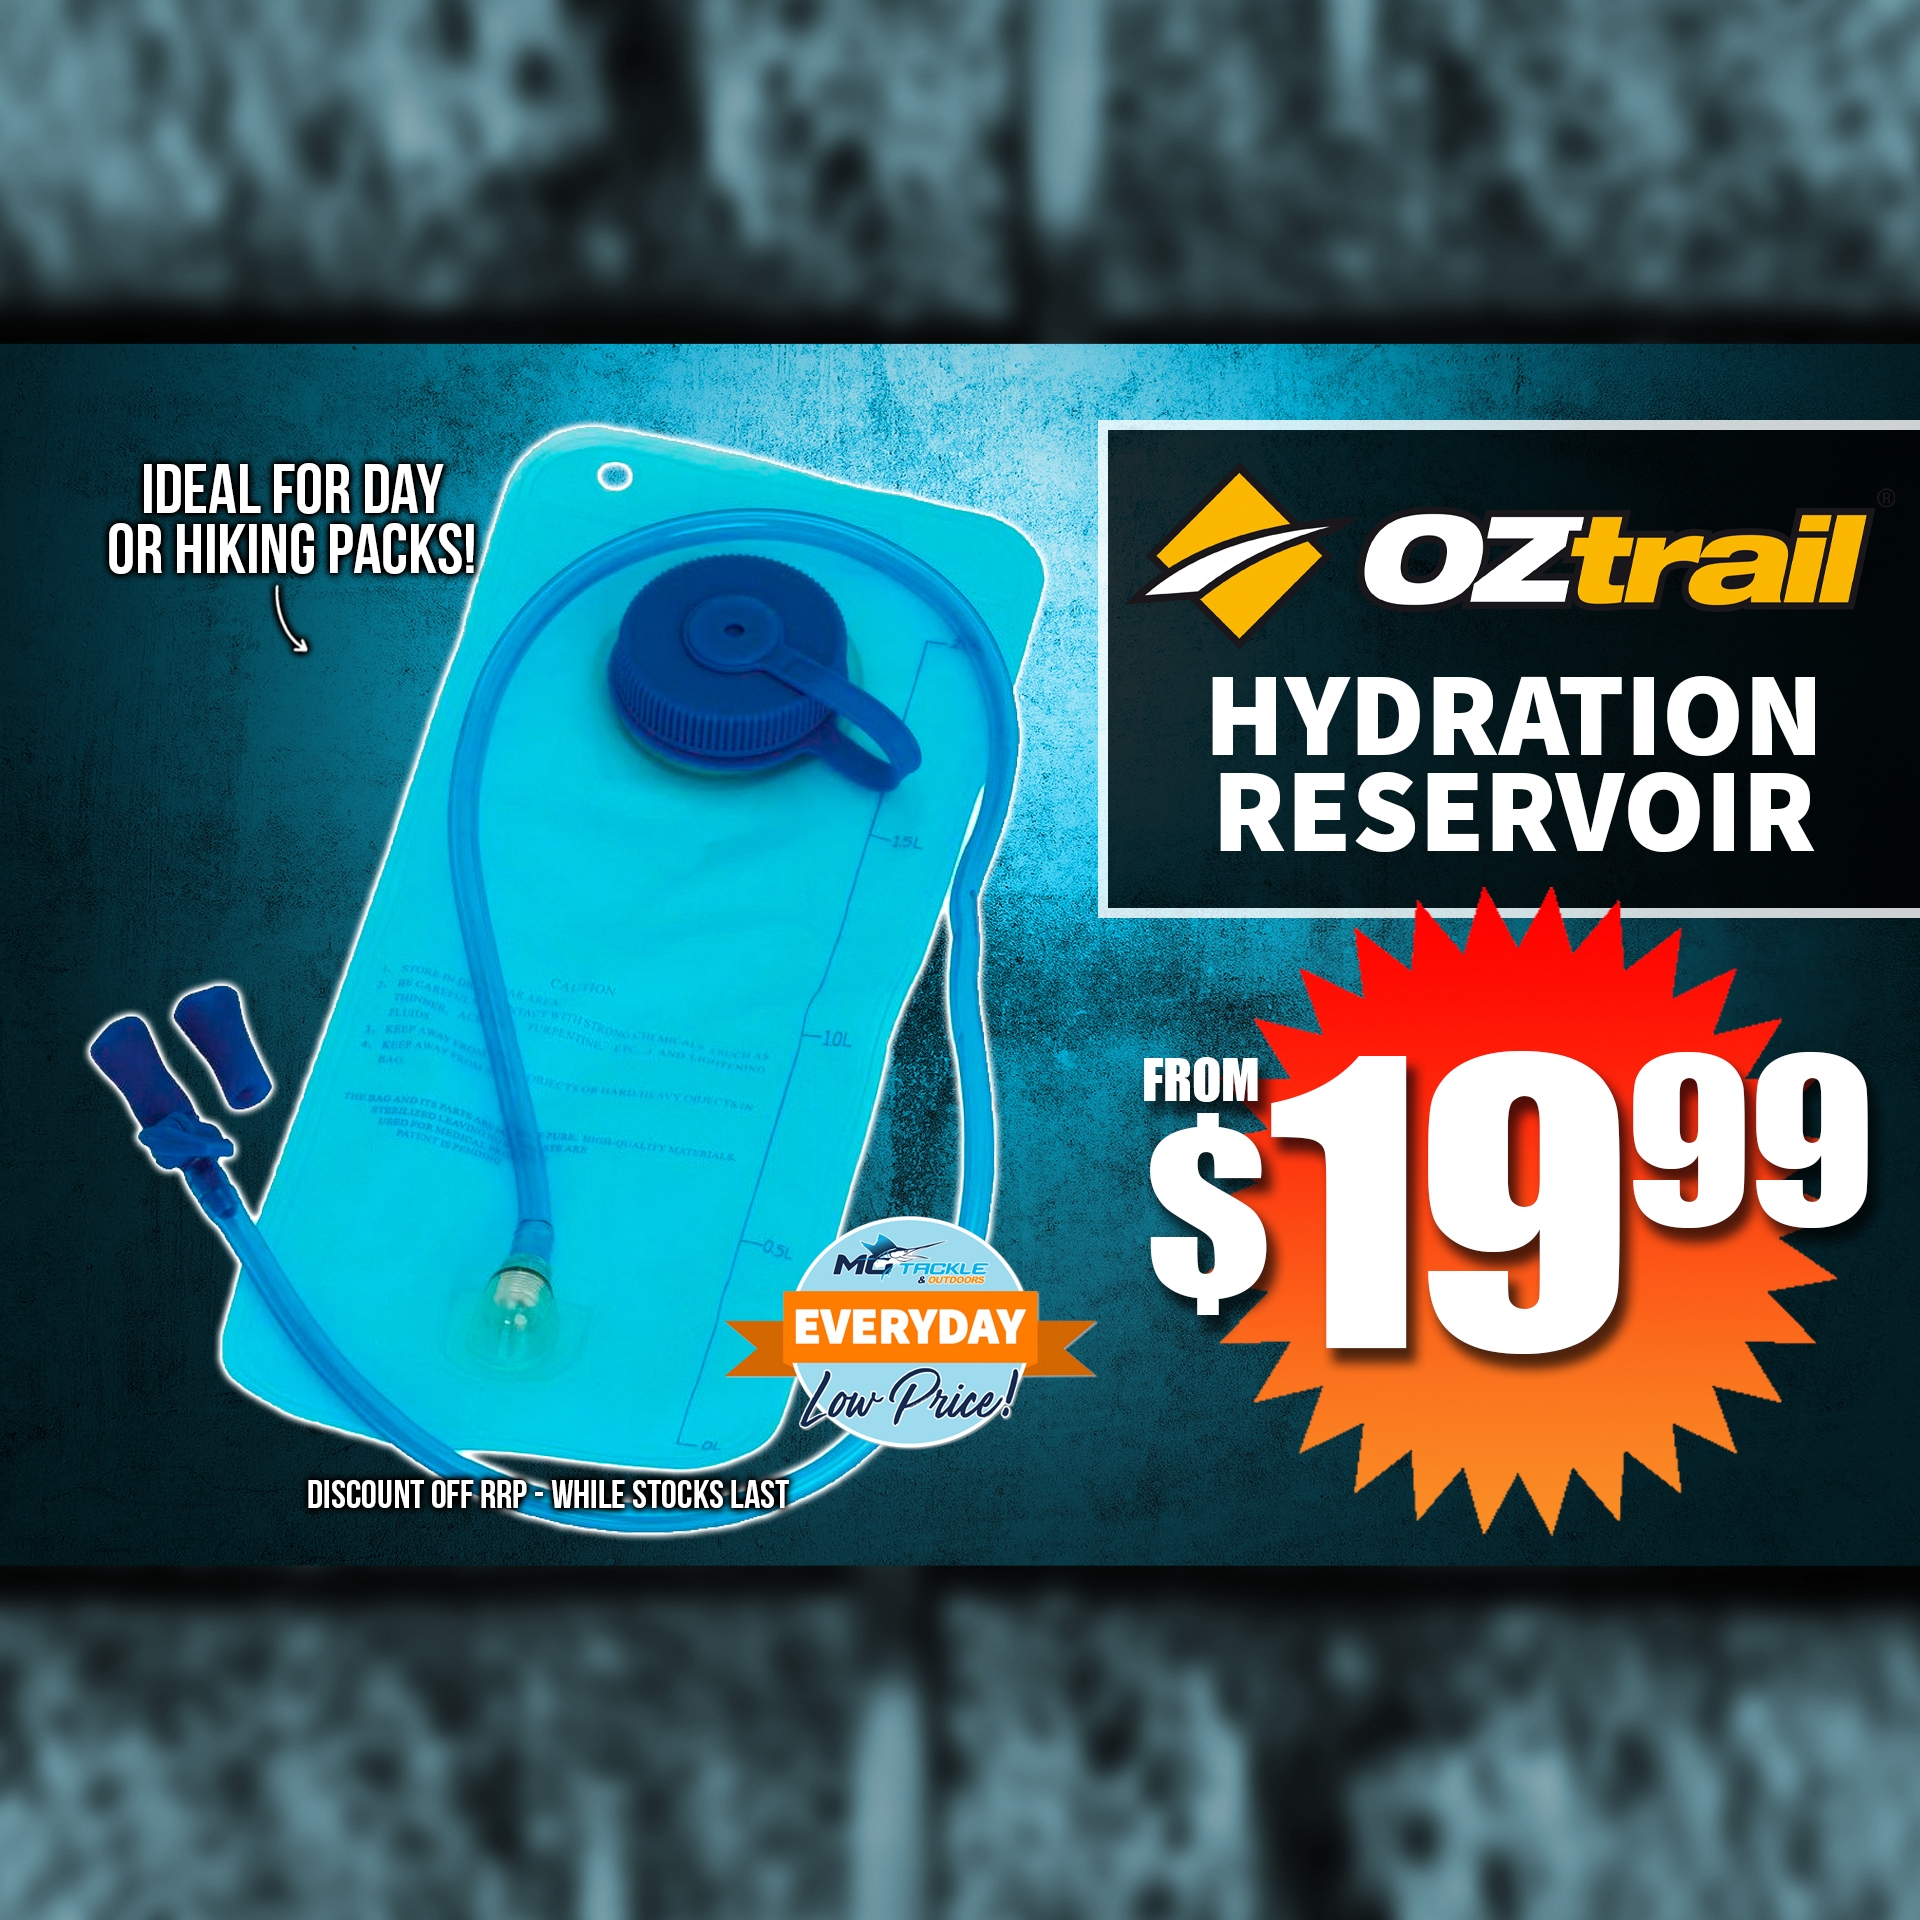 OZTRAIL HYDRATION RESERVOIR from $19.99